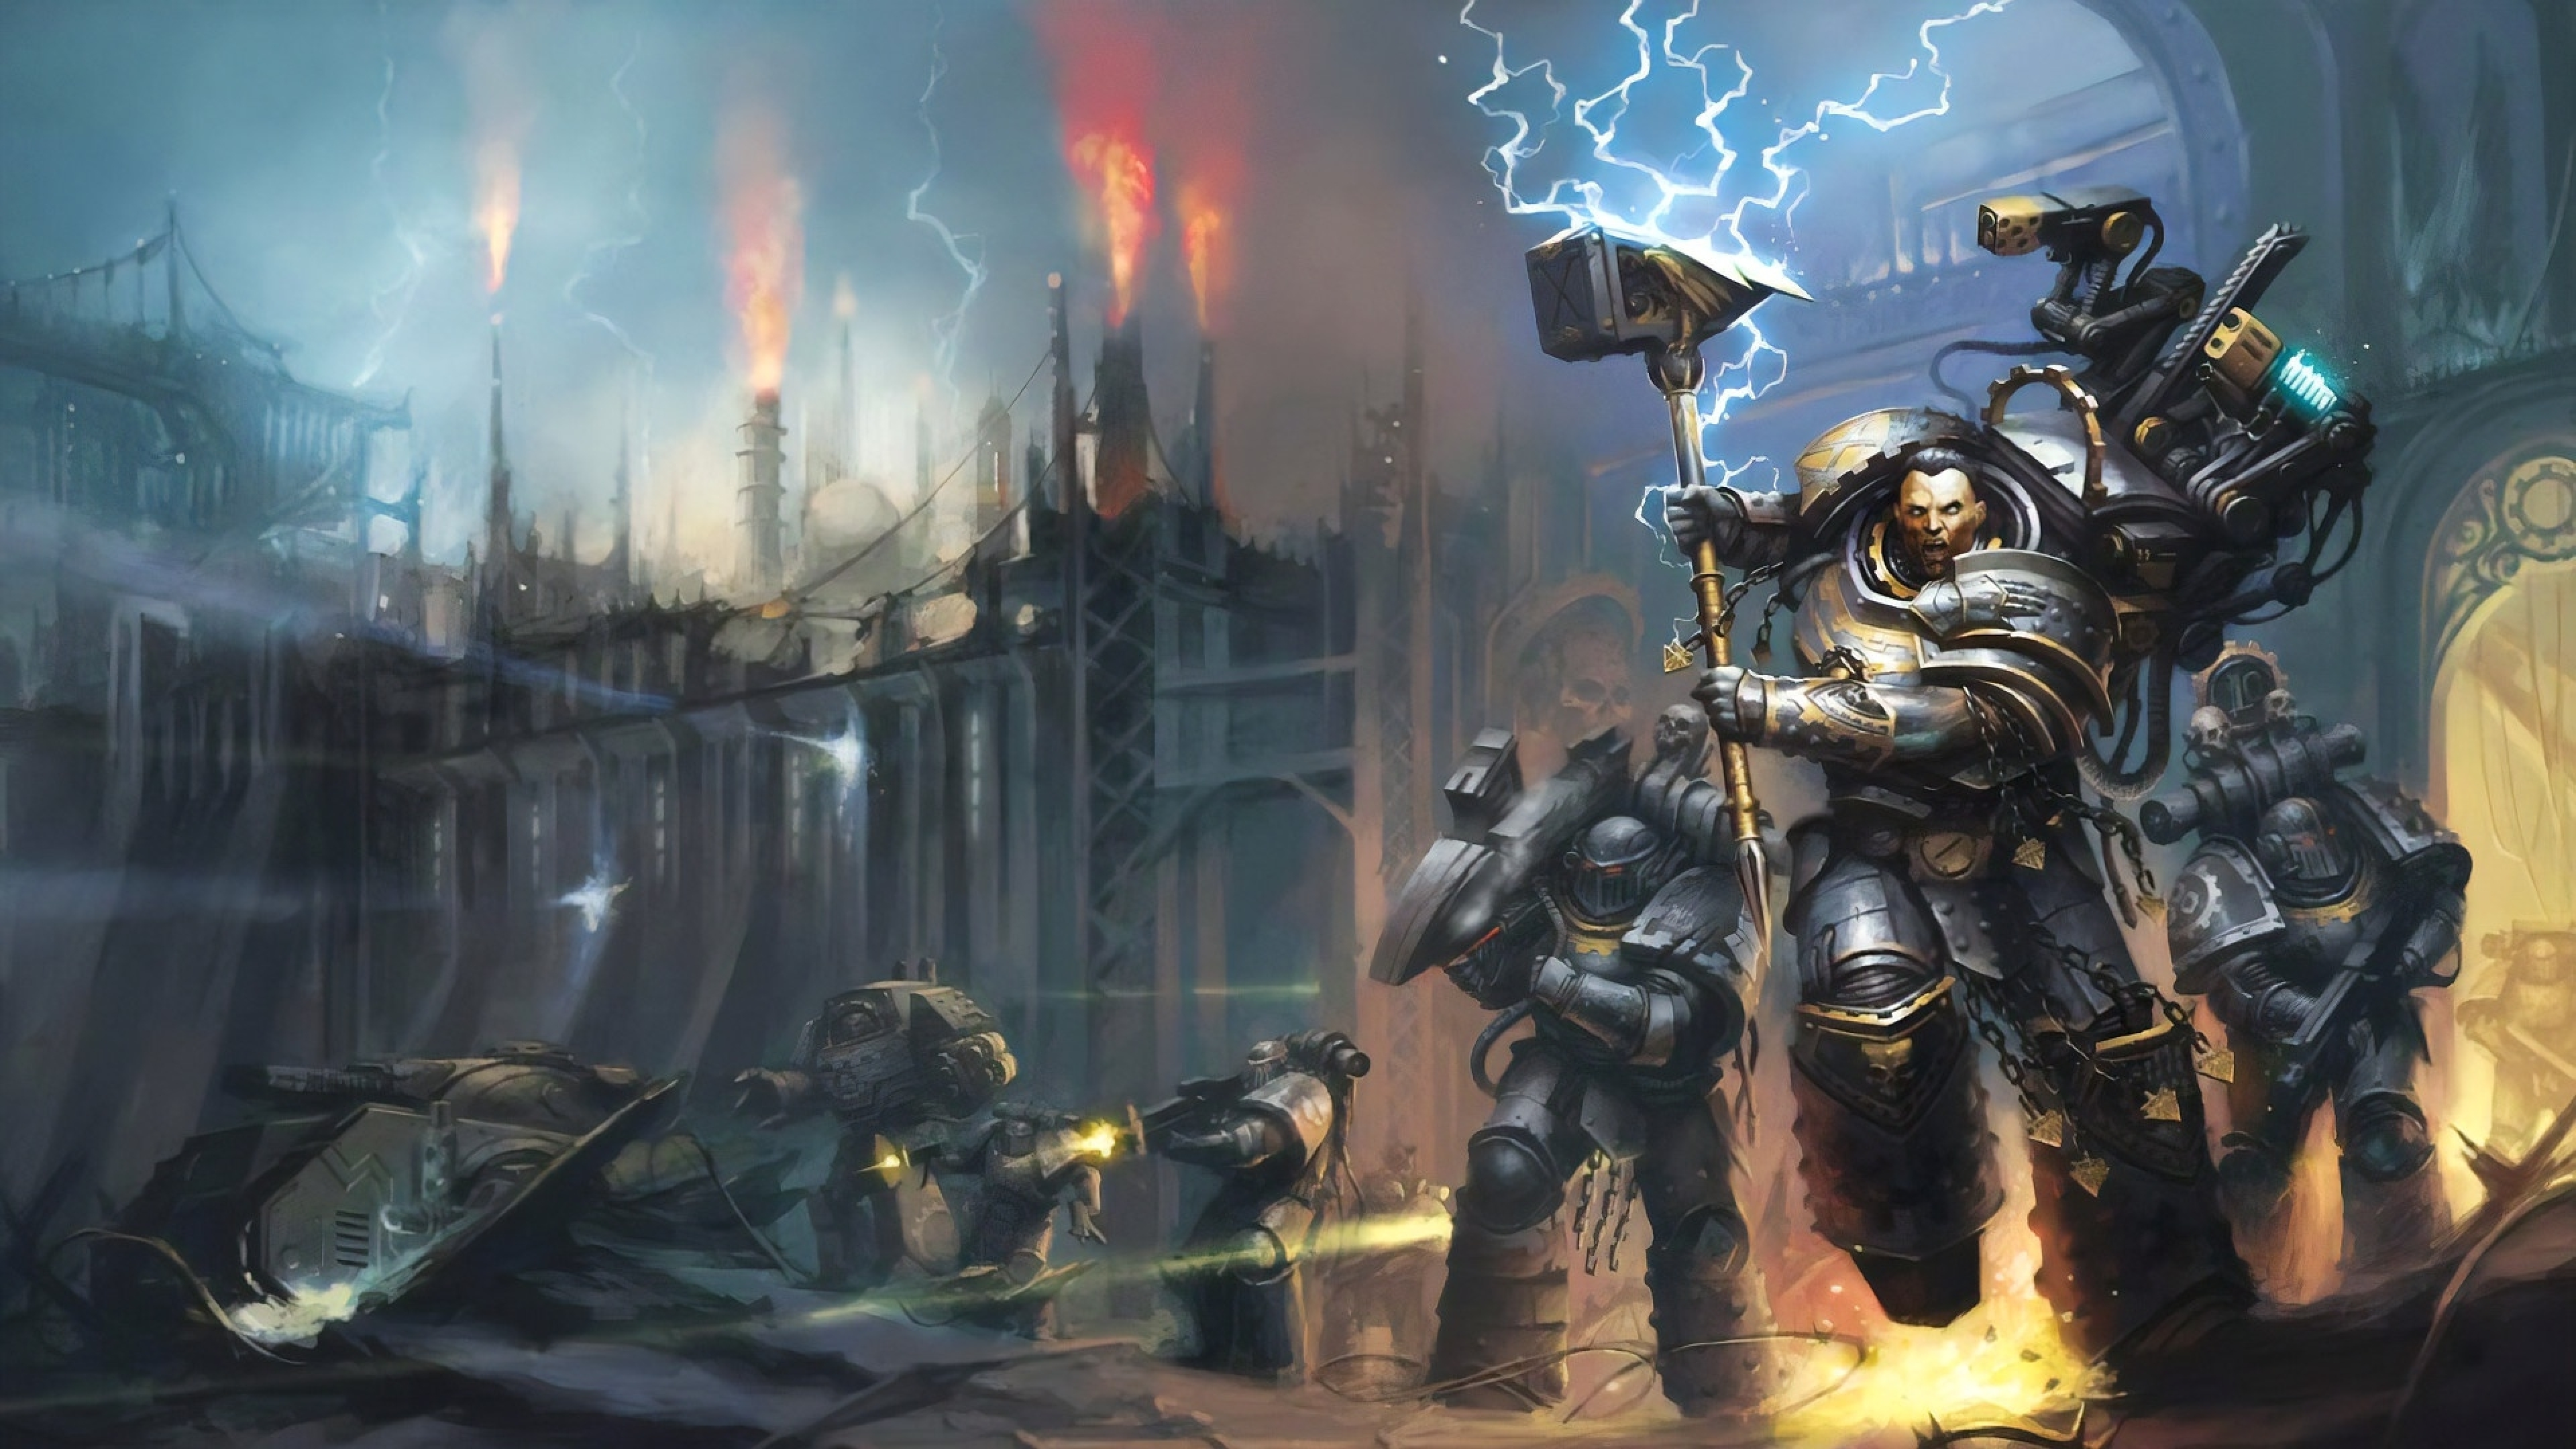 Warhammer 40K Images Wallpapers : Warhammer 40,000, sisters of battle ...